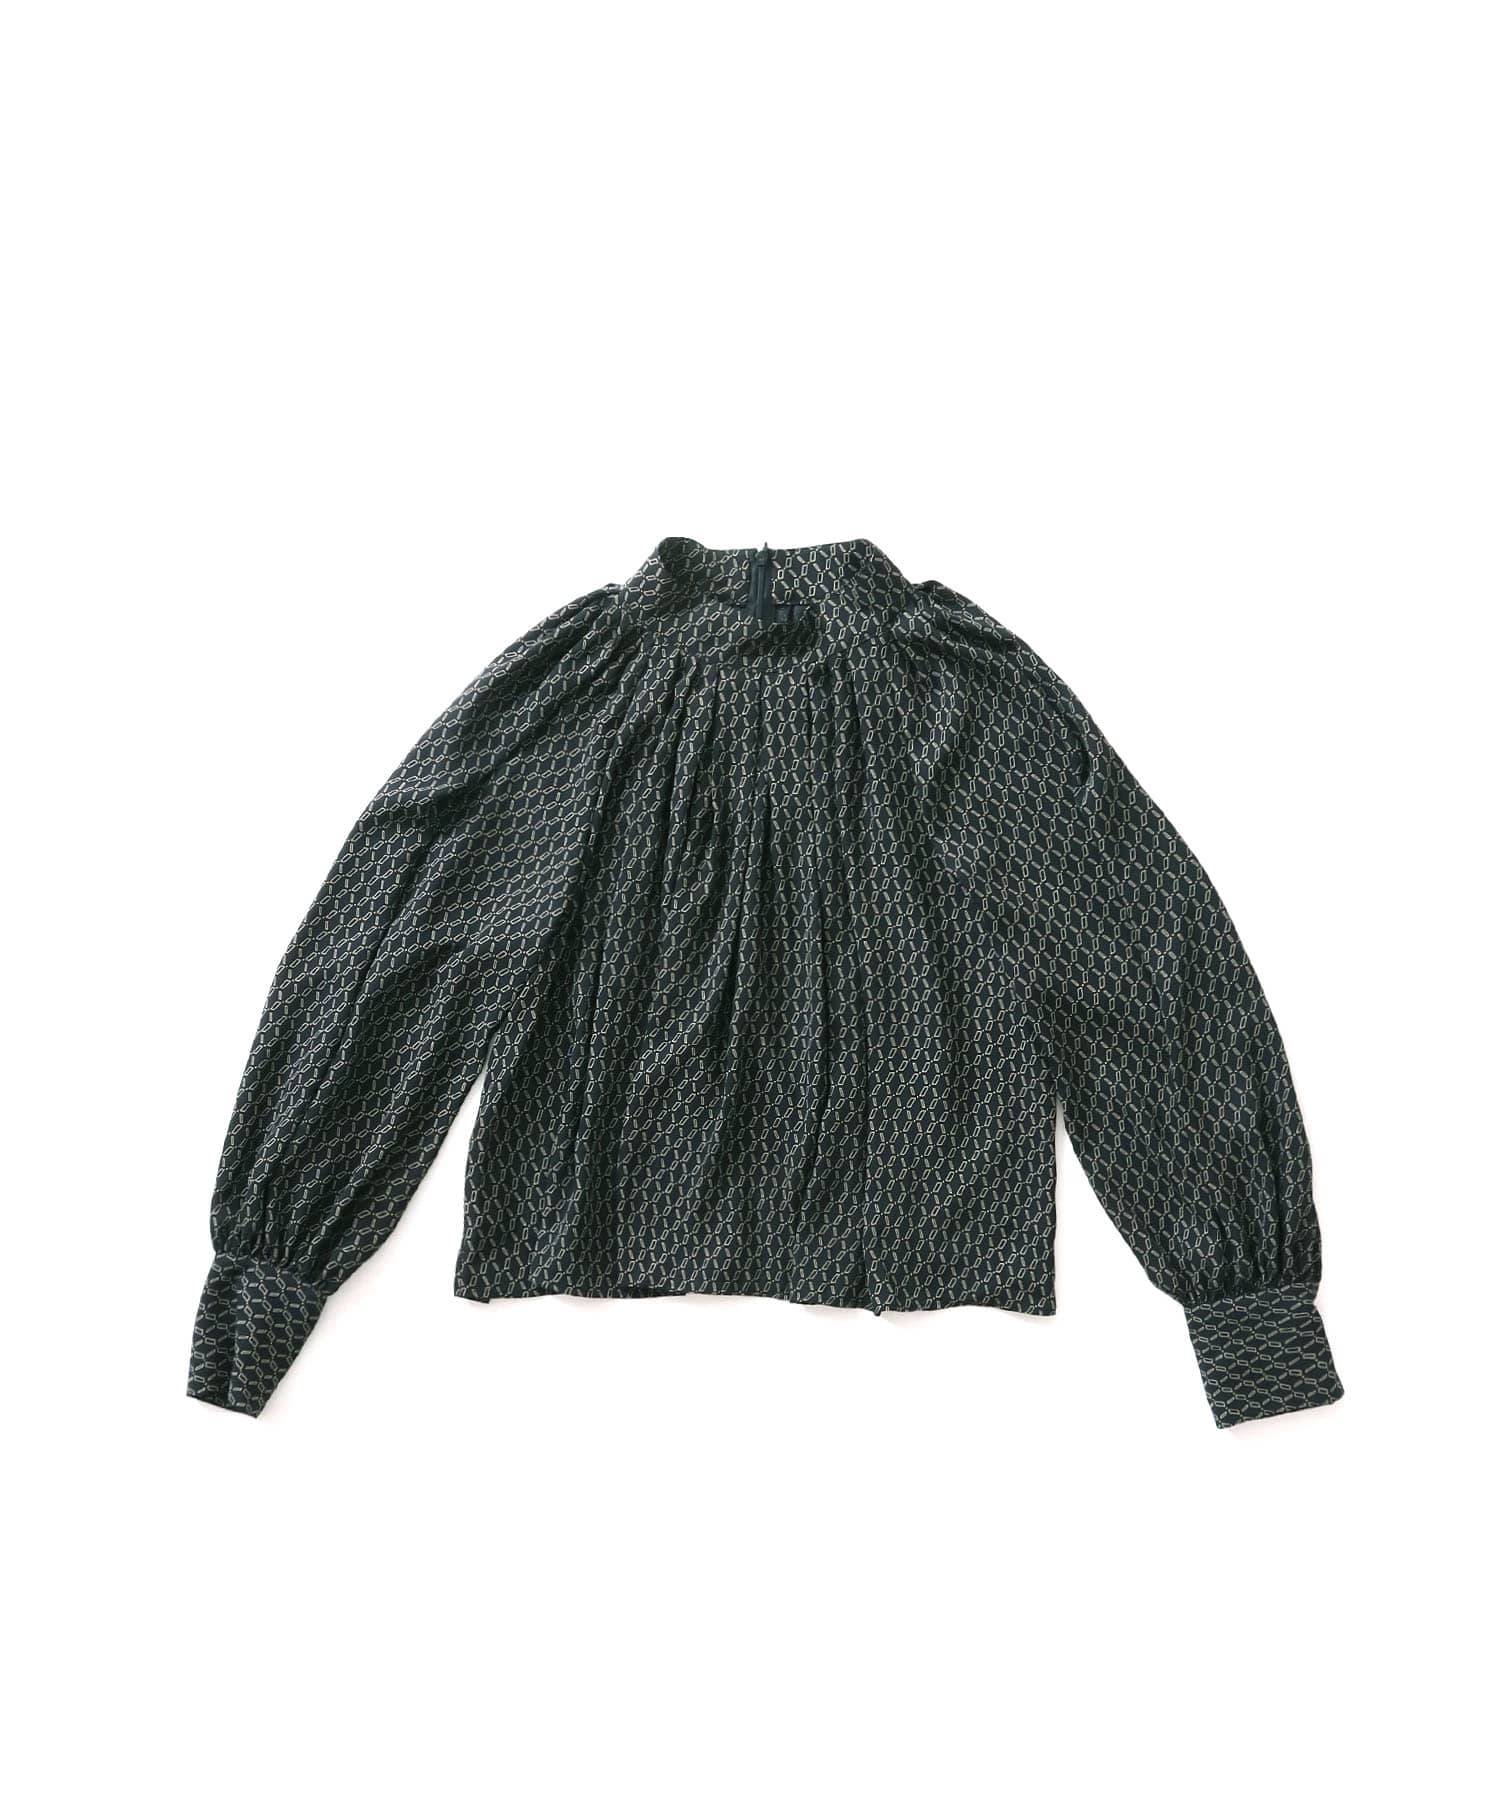 B7＞stand shortlength blouse | AND ON JIONE STORE（アンドオン